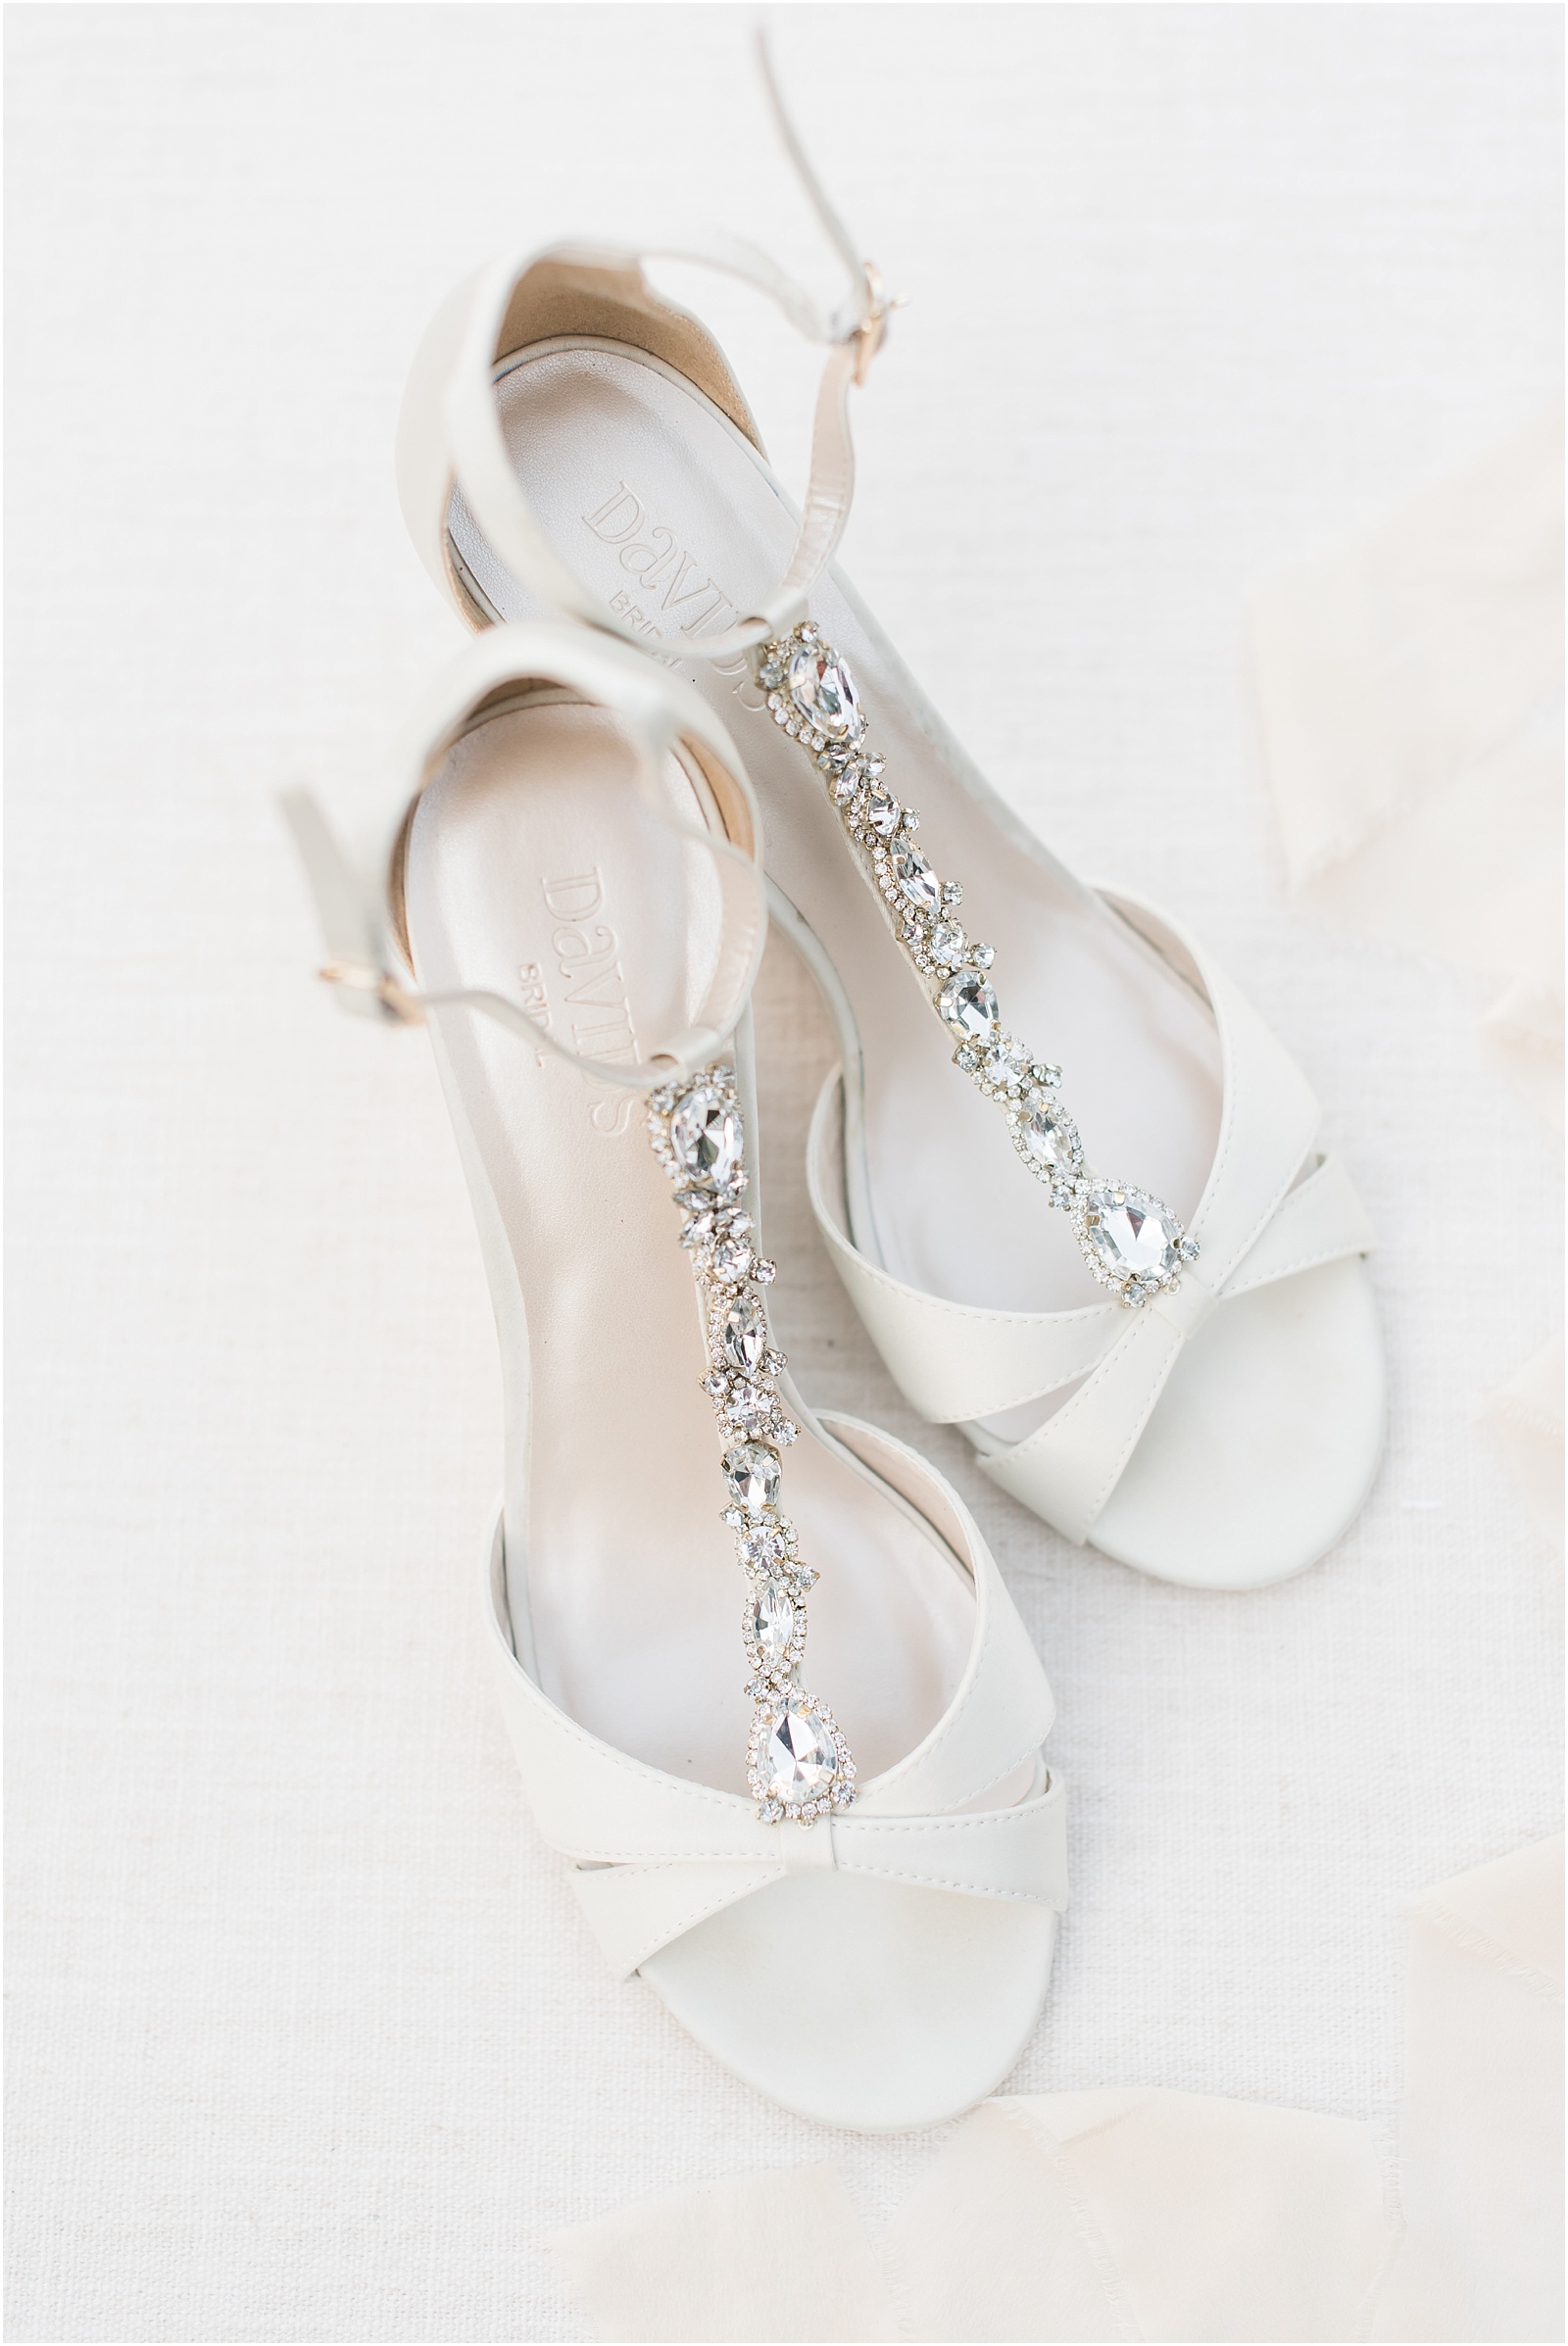 David's Bridal cream colored heals with sliver jewels on the straps